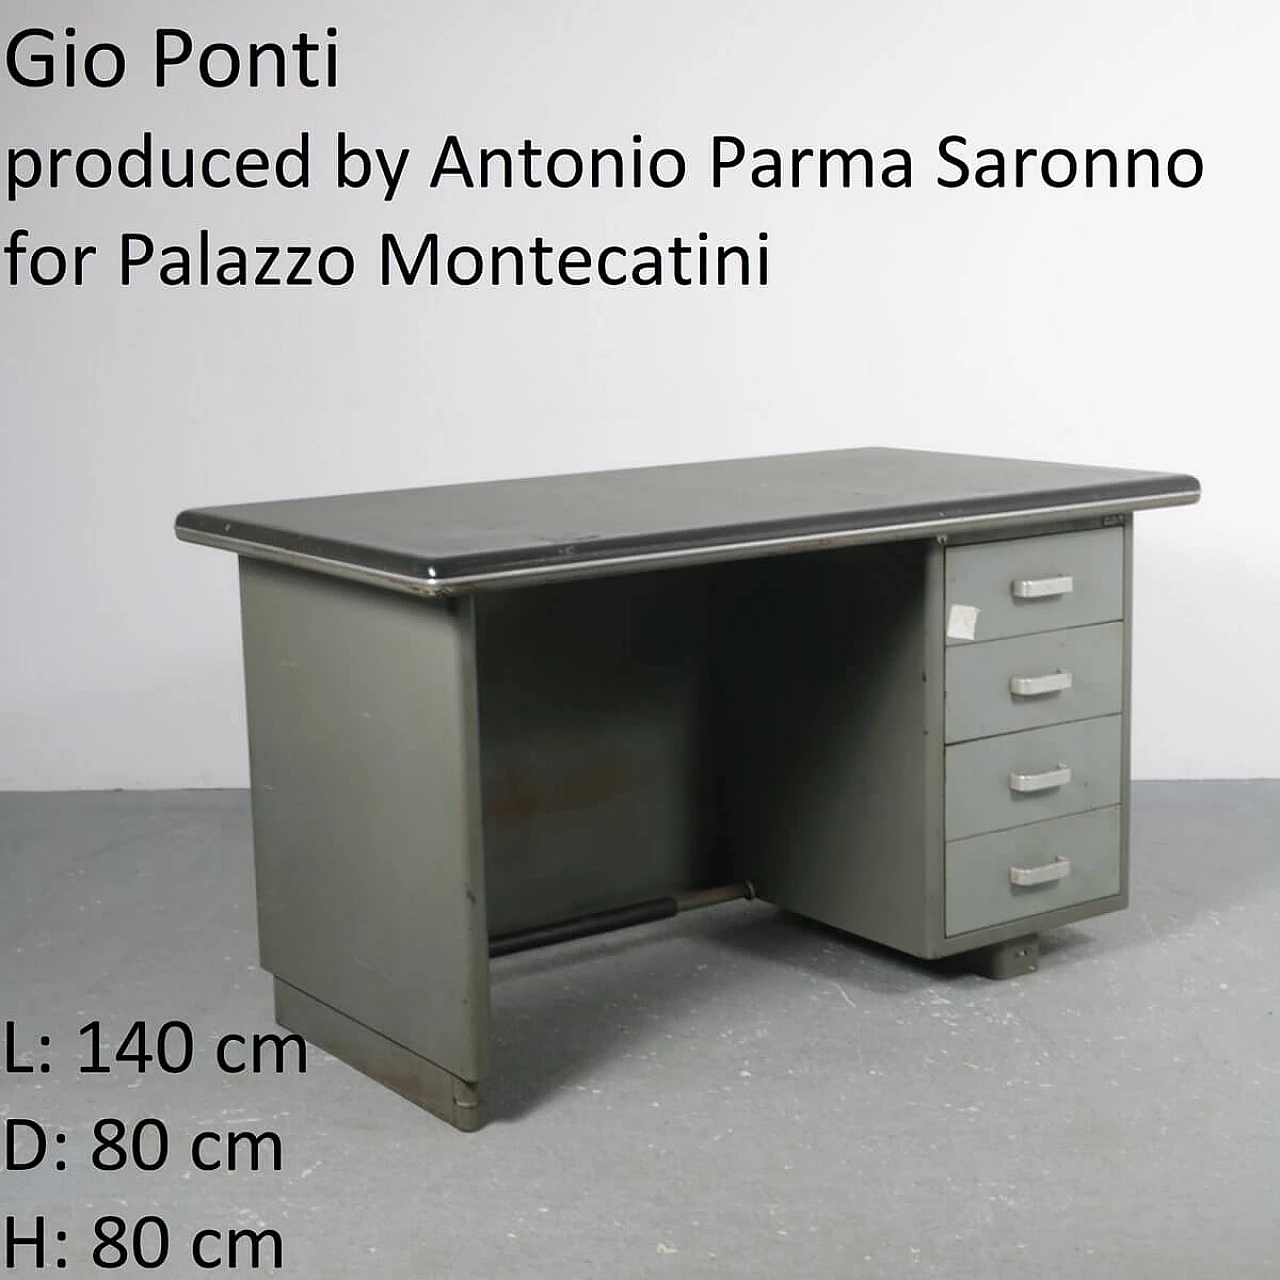 Desk for Palazzo Montecatini in metal with leather top by Gio Ponti for Antonio Parma Saronno, 30s 1331870